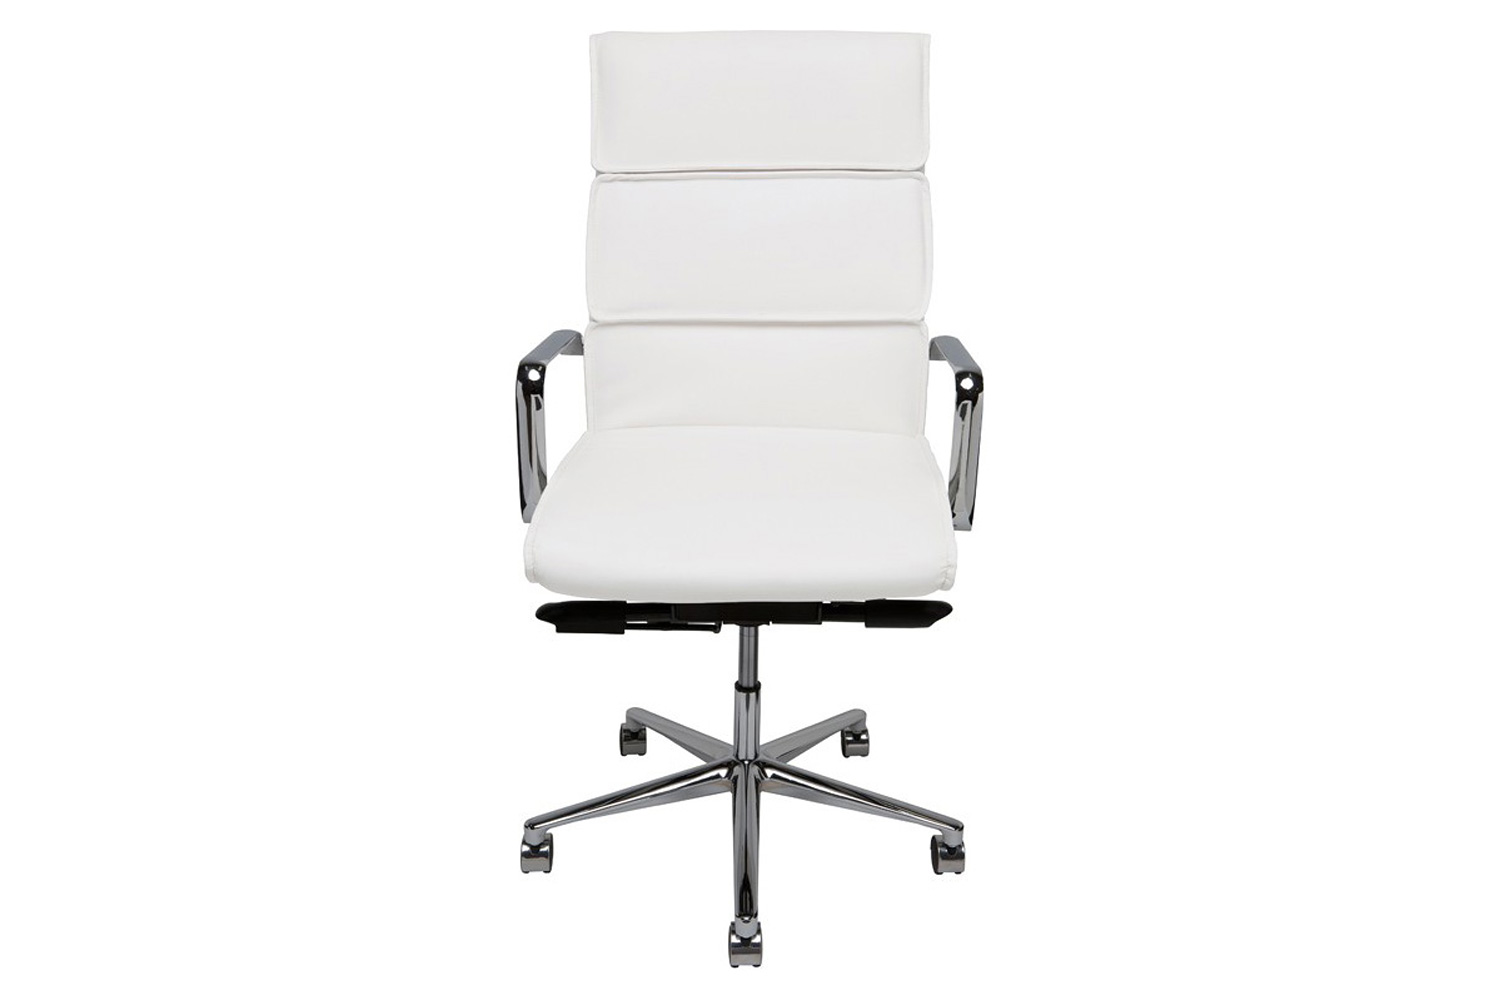 A stylish and comfortable white chair for a home office - Nuevo Lucia Office Chair White Naugahyde Seat